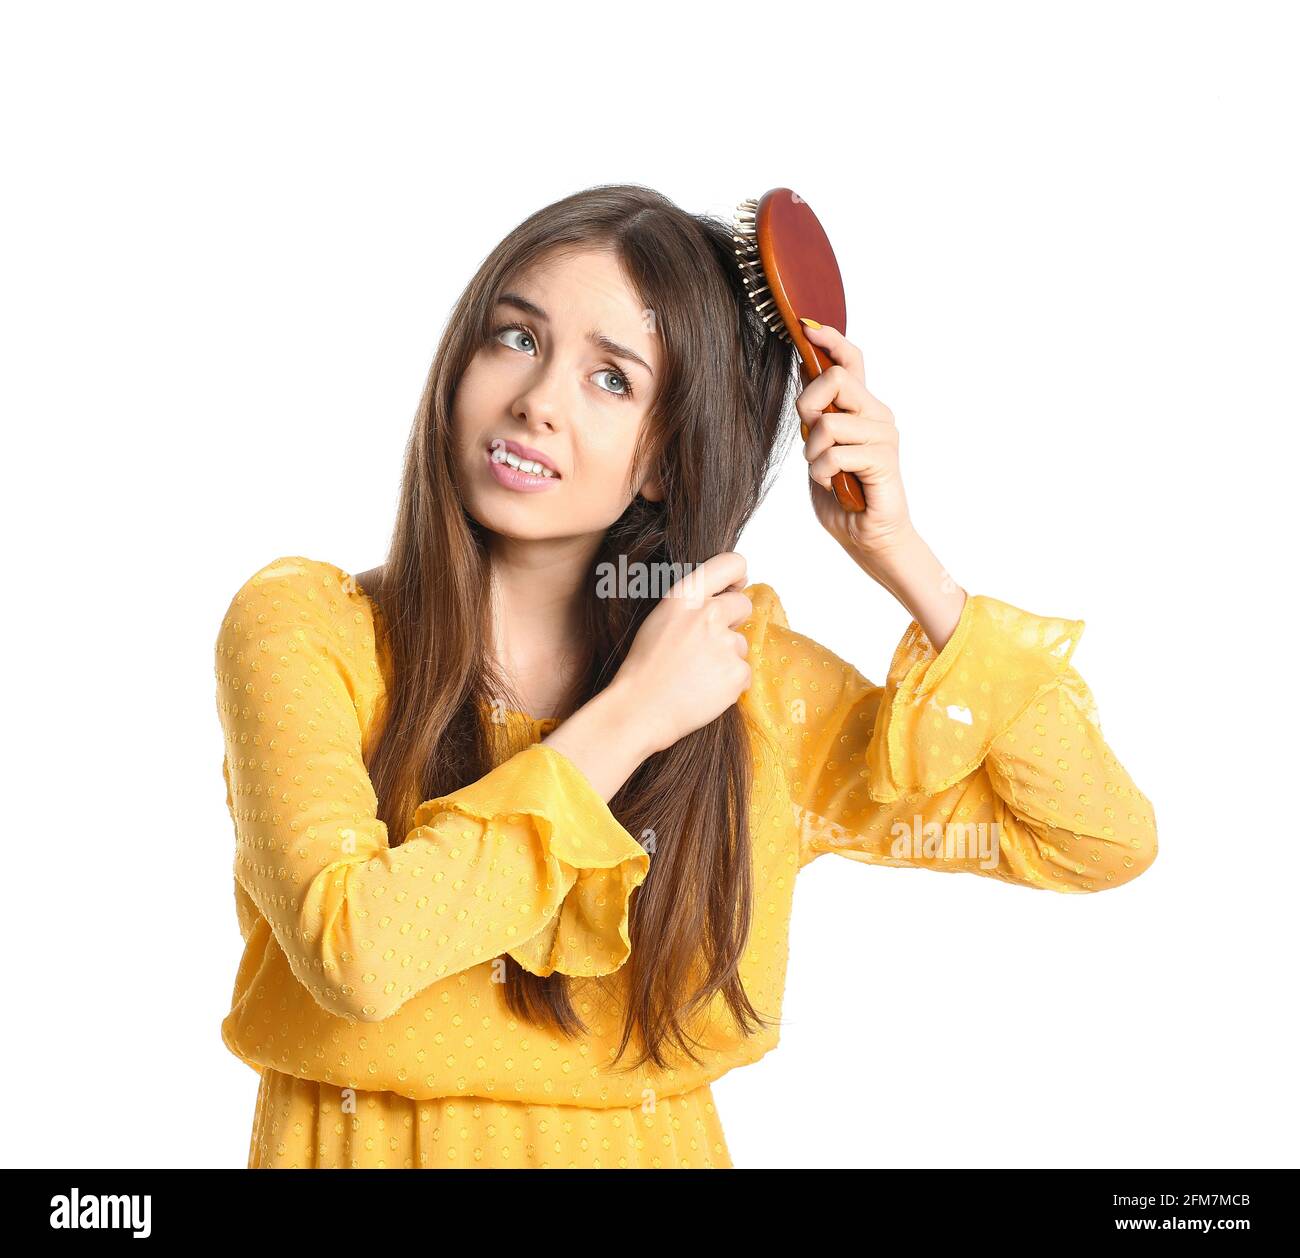 Sad young woman with hair brush on white background Stock Photo - Alamy